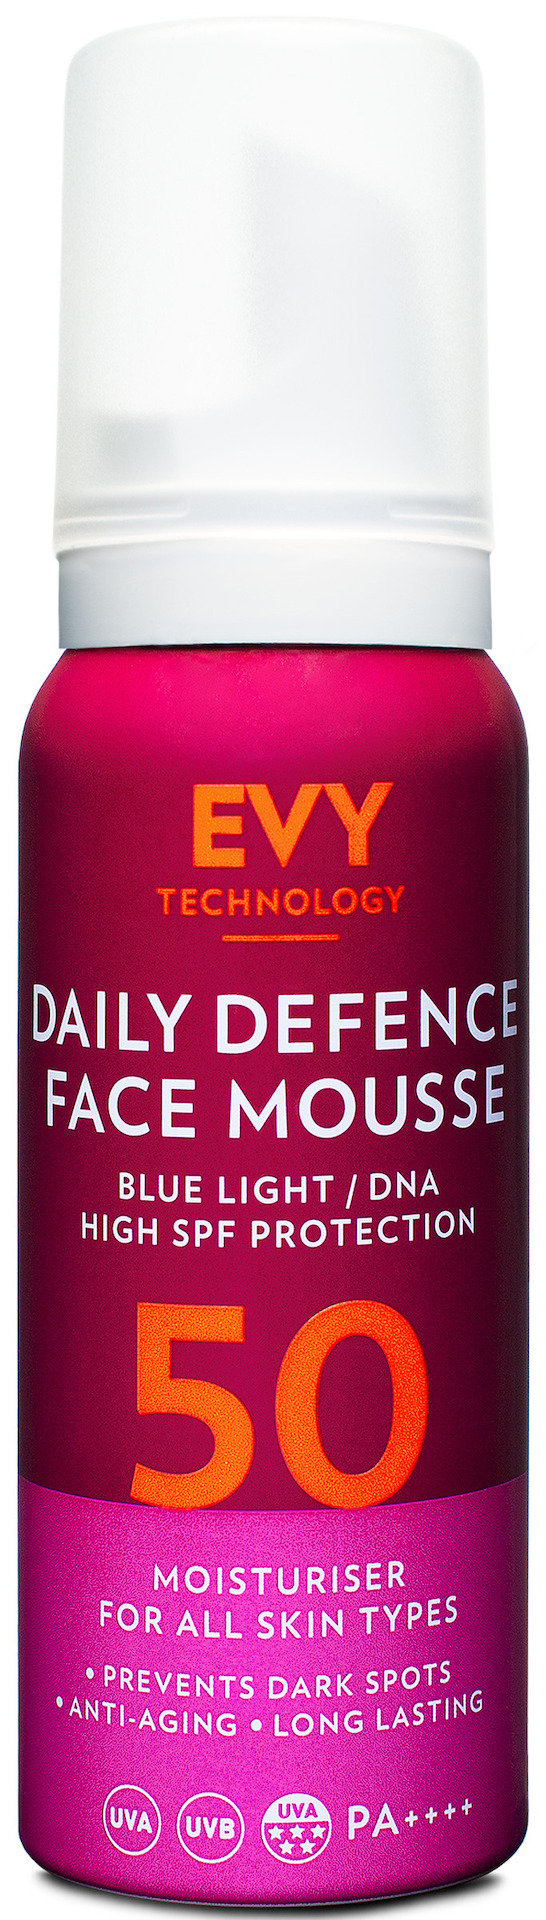 Evy Technology Daily Defence UV Face Mousse 75 ml